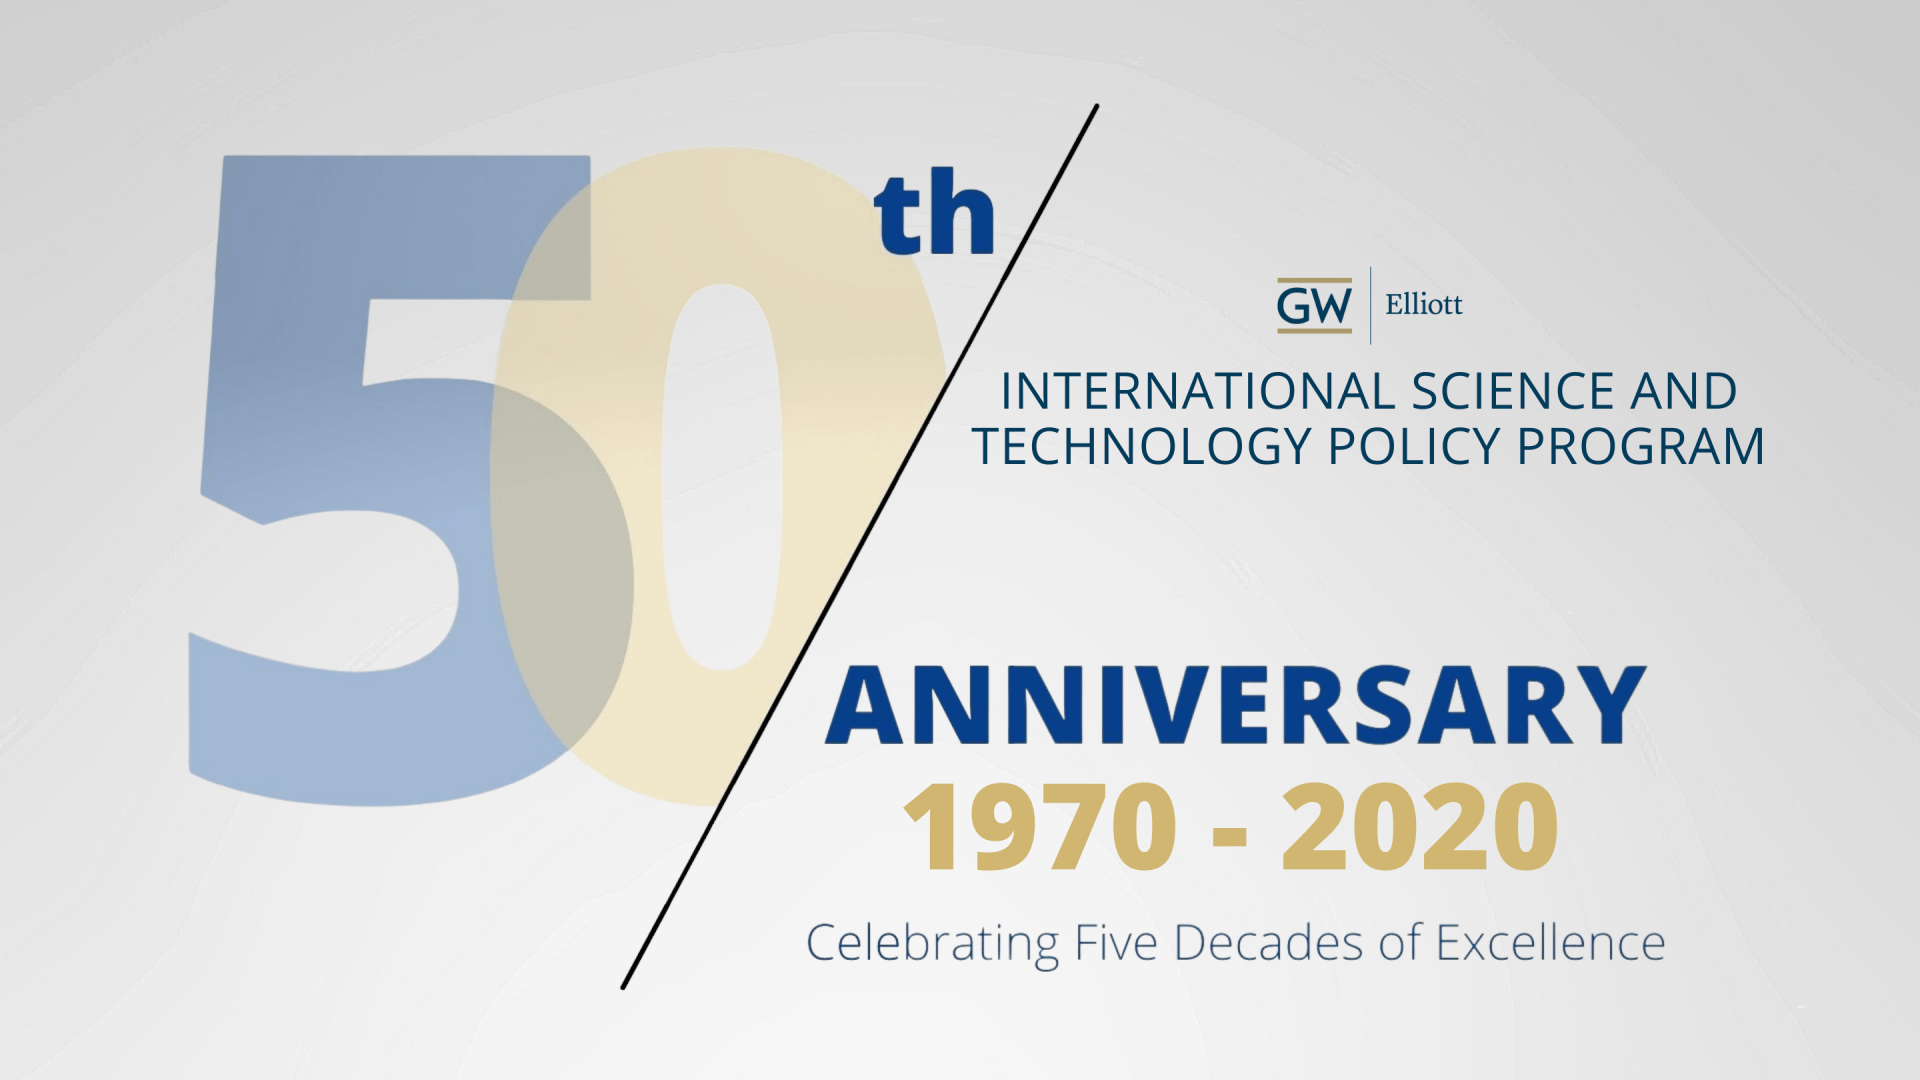 Graphic denoting the 50th Anniversary of the International Science and Technology Policy program